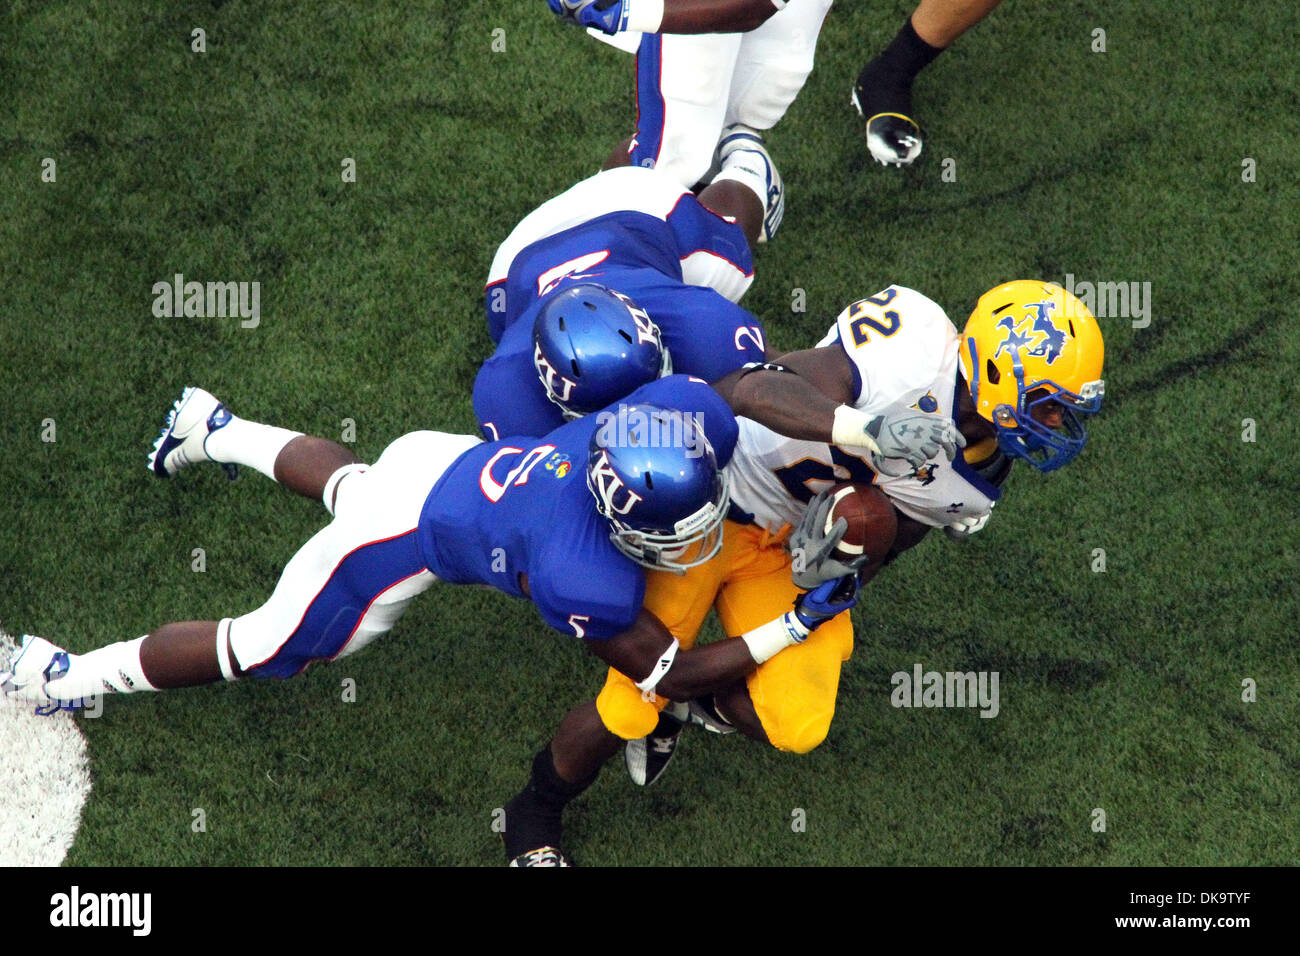 Sept. 3, 2011 - Lawrence, Kansas, United States of America - Mcneese State Cowboys running back Andre Anderson (22) is brought down by Kansas Jayhawks cornerback Greg Brown (5) and linebacker Darius Willis (2) during first half action. Kansas leads McNeese State 21-3 at halftime in the game at Memorial Stadium in Lawrence, Kansas. (Credit Image: © Jacob Paulsen/Southcreek Global/ZU Stock Photo